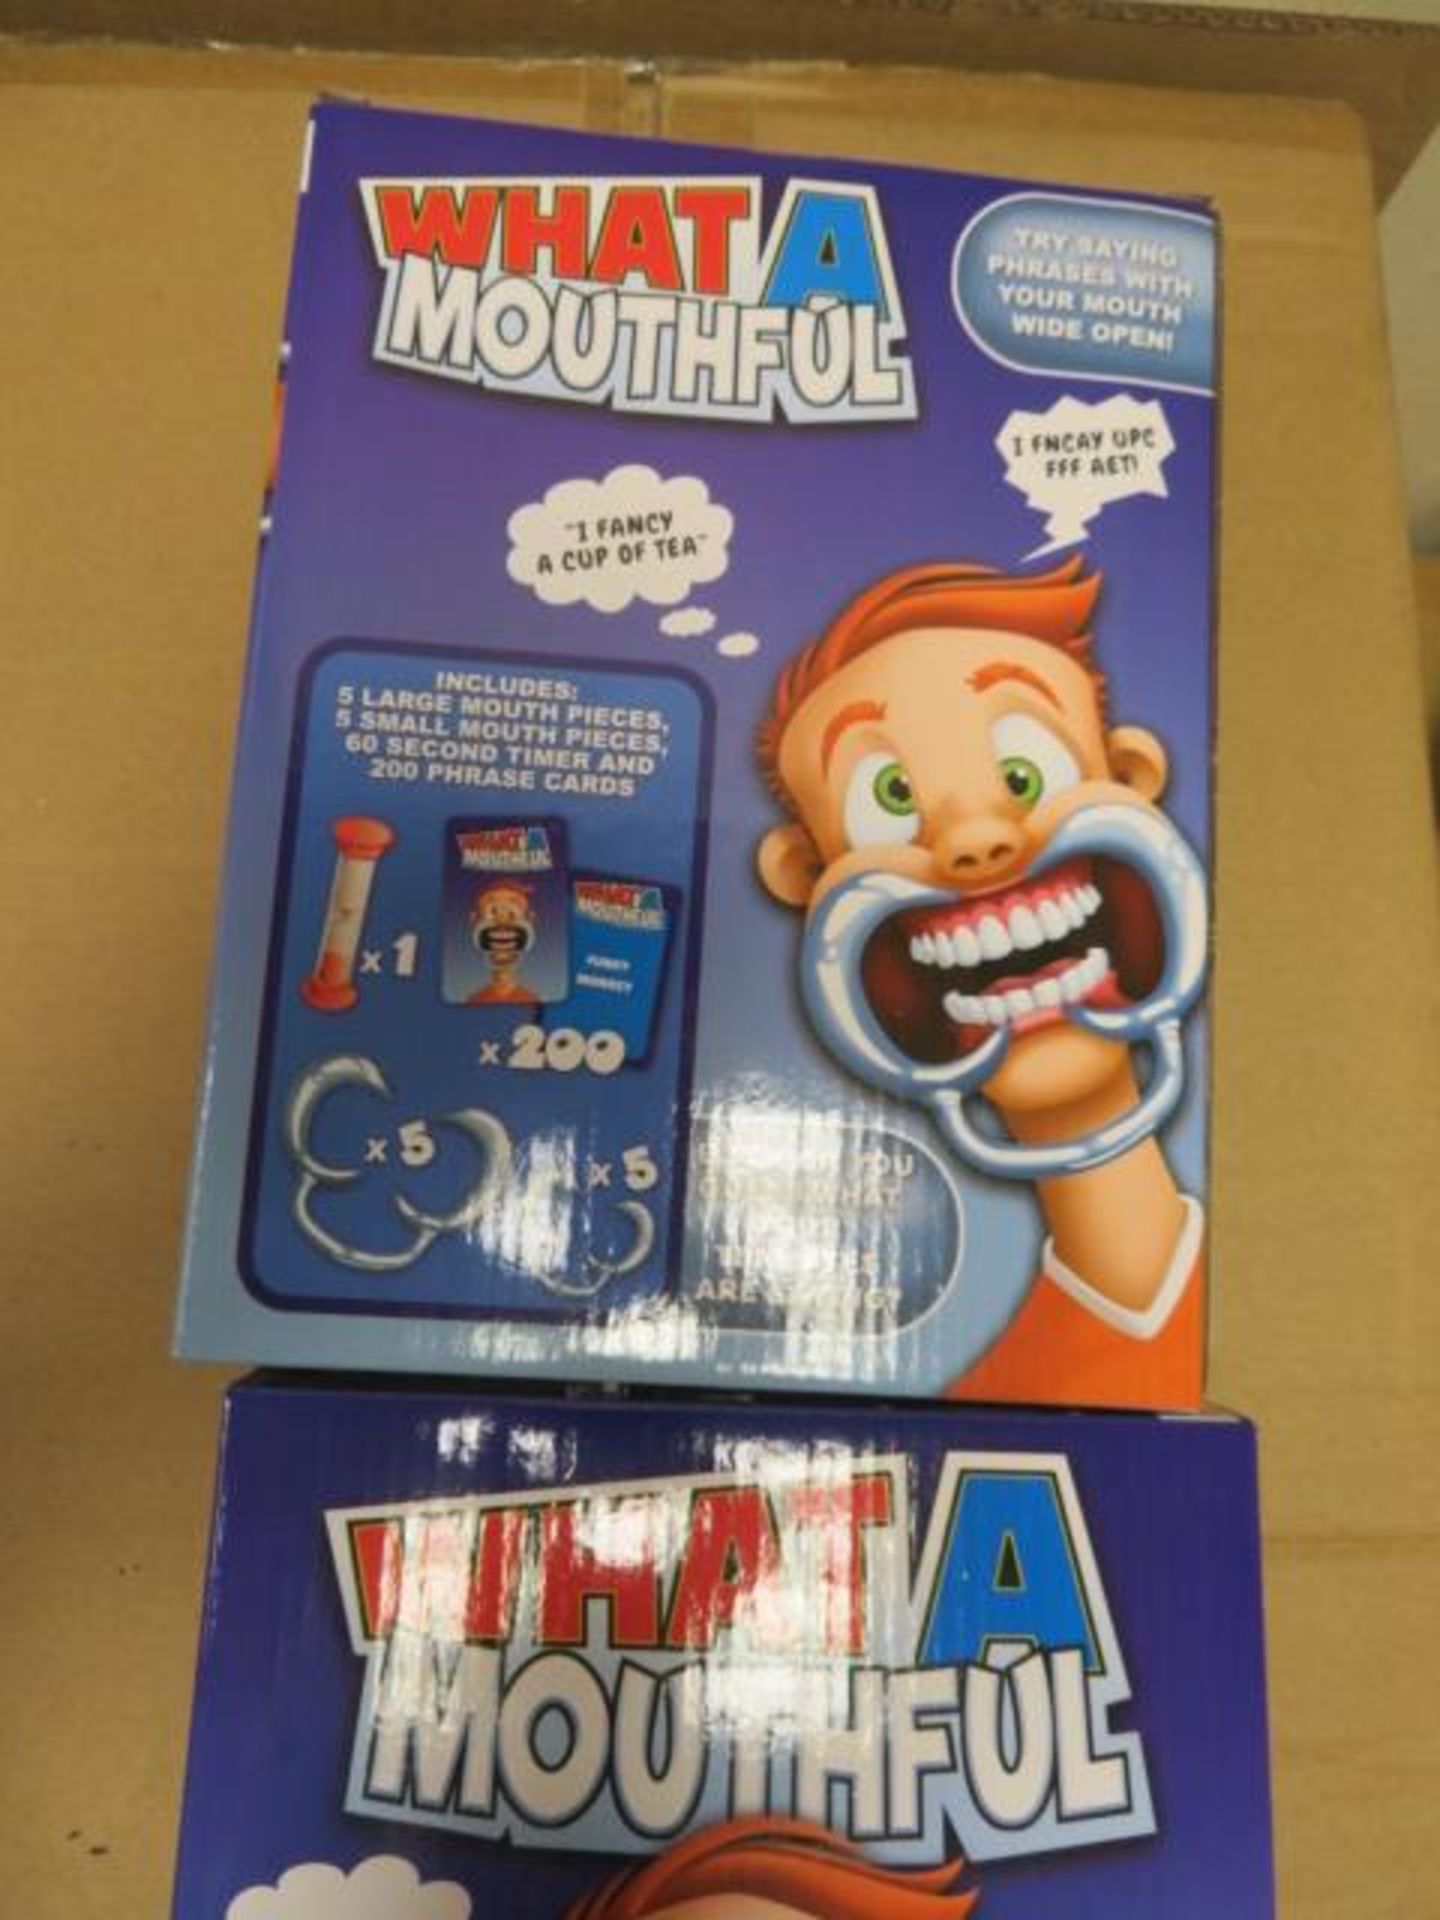 (242) PALLET TO CONTAIN 96 X BRAND NEW WHAT A MOUTHFUL FAMILY GAME. TRY SAYING PHRASES WITH YOU... - Image 4 of 4